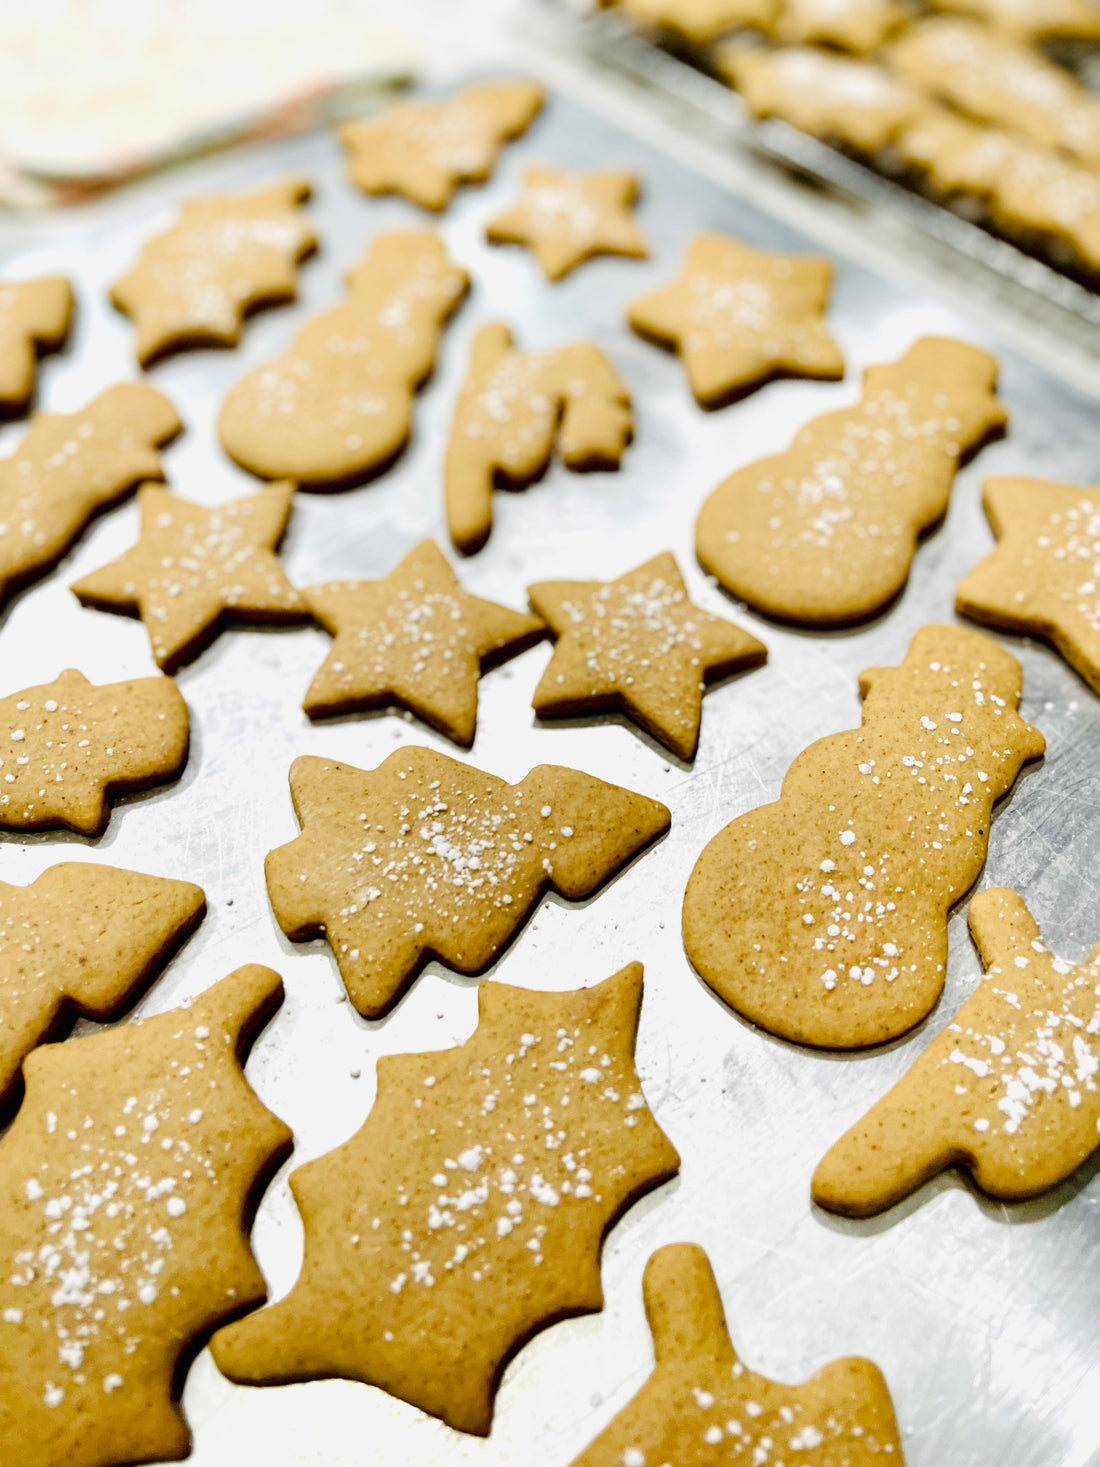 Gingerbread Cookies made with EVOO